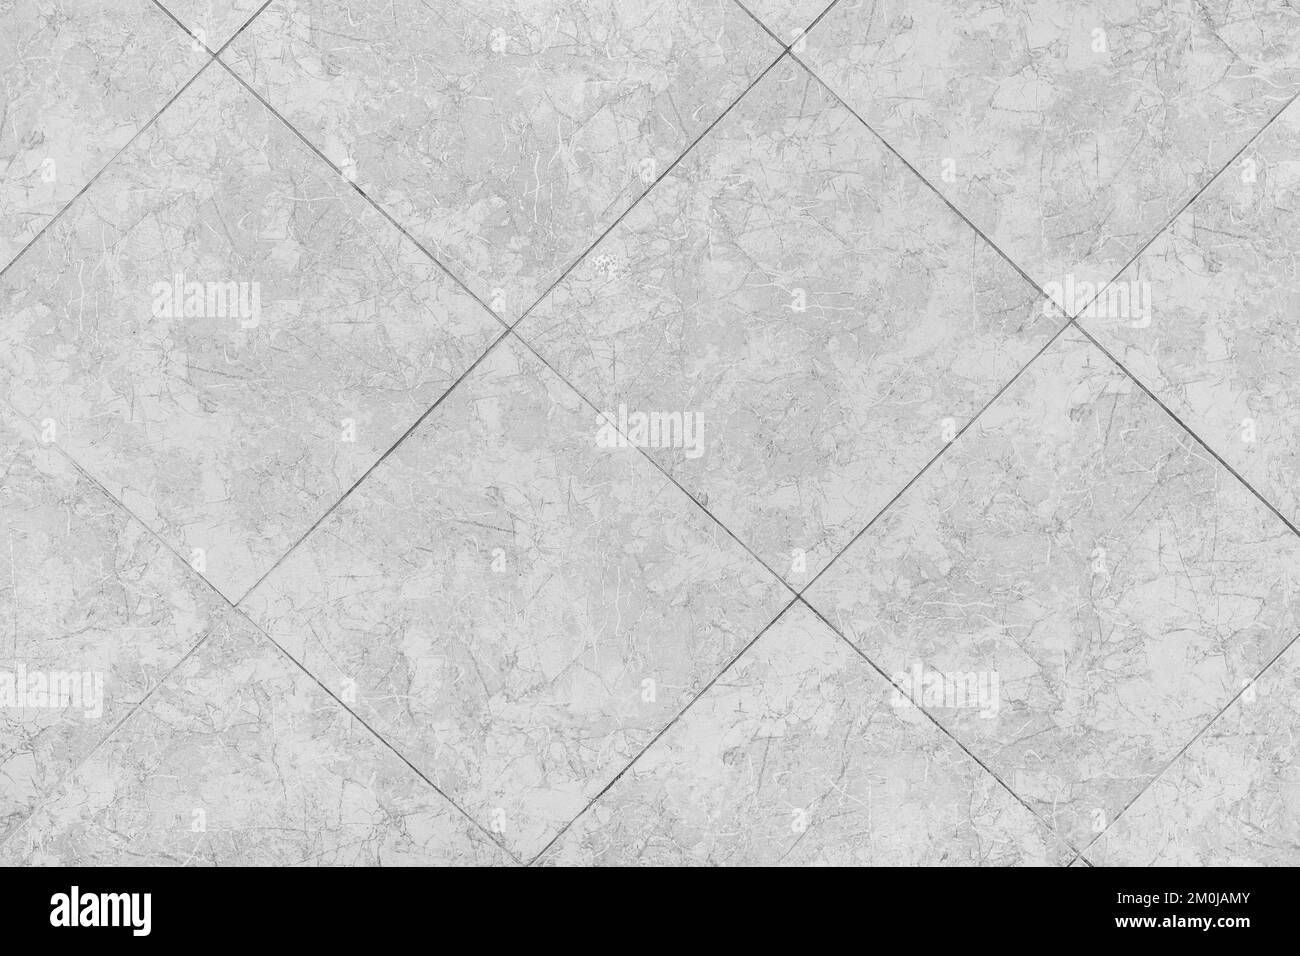 Tiles ceramic pattern Black and White Stock Photos & Images - Page 2 - Alamy